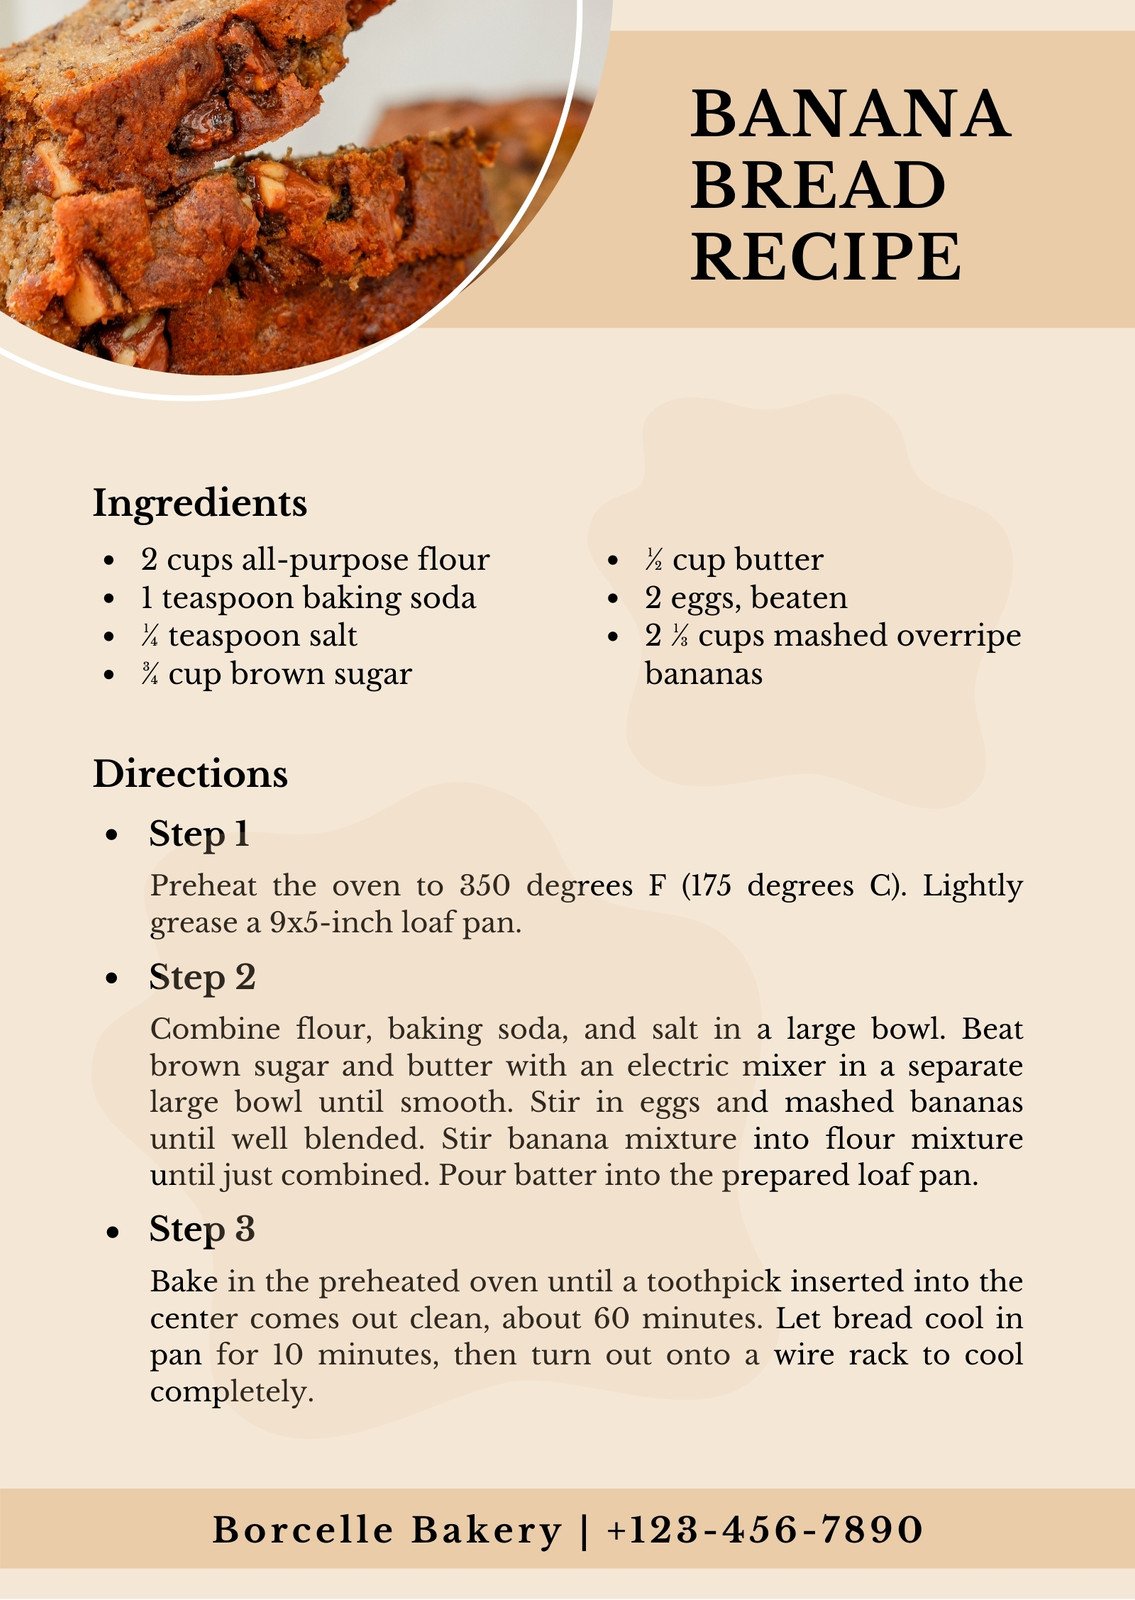 Create Your Own Recipe Book With Our Canva Template